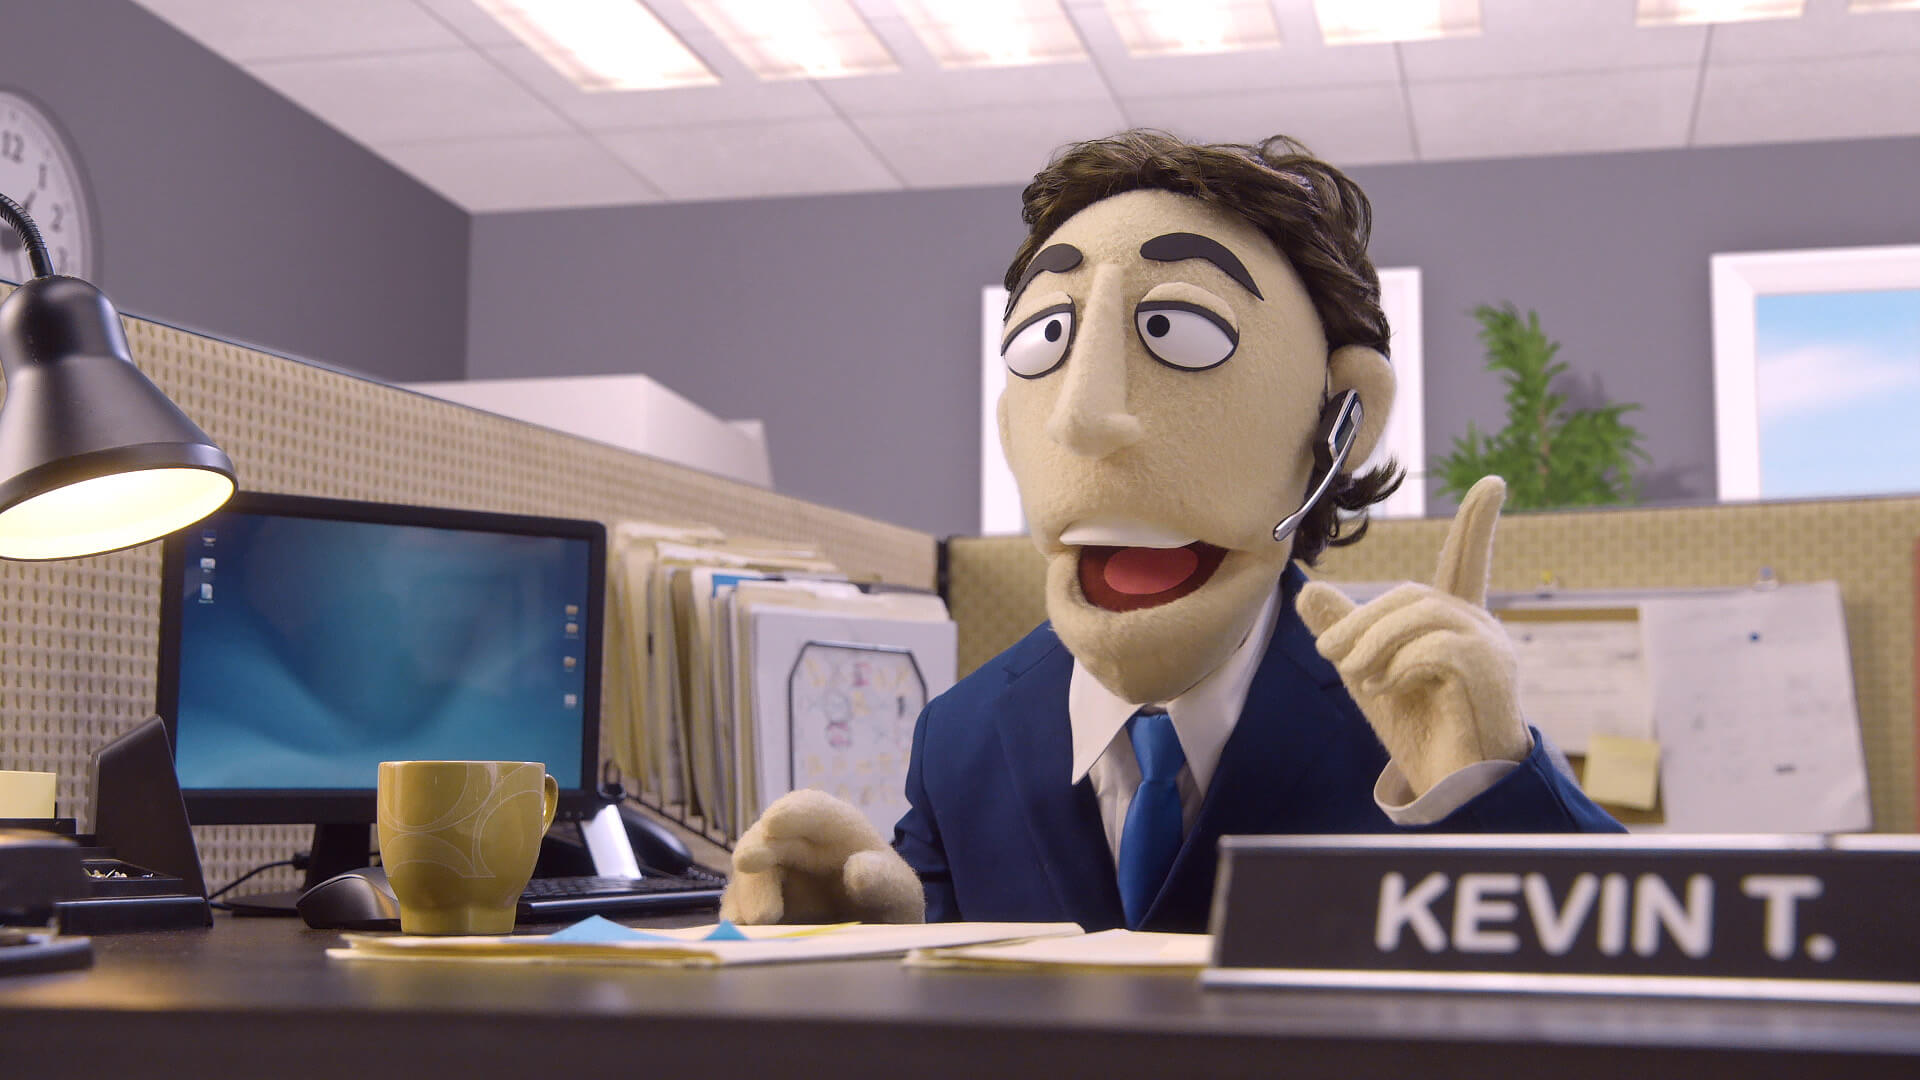 Kevin Nealon's puppet prank calls a flower shop in a scene for Comedy Central's Crank Yankers directed by Todd Bishop